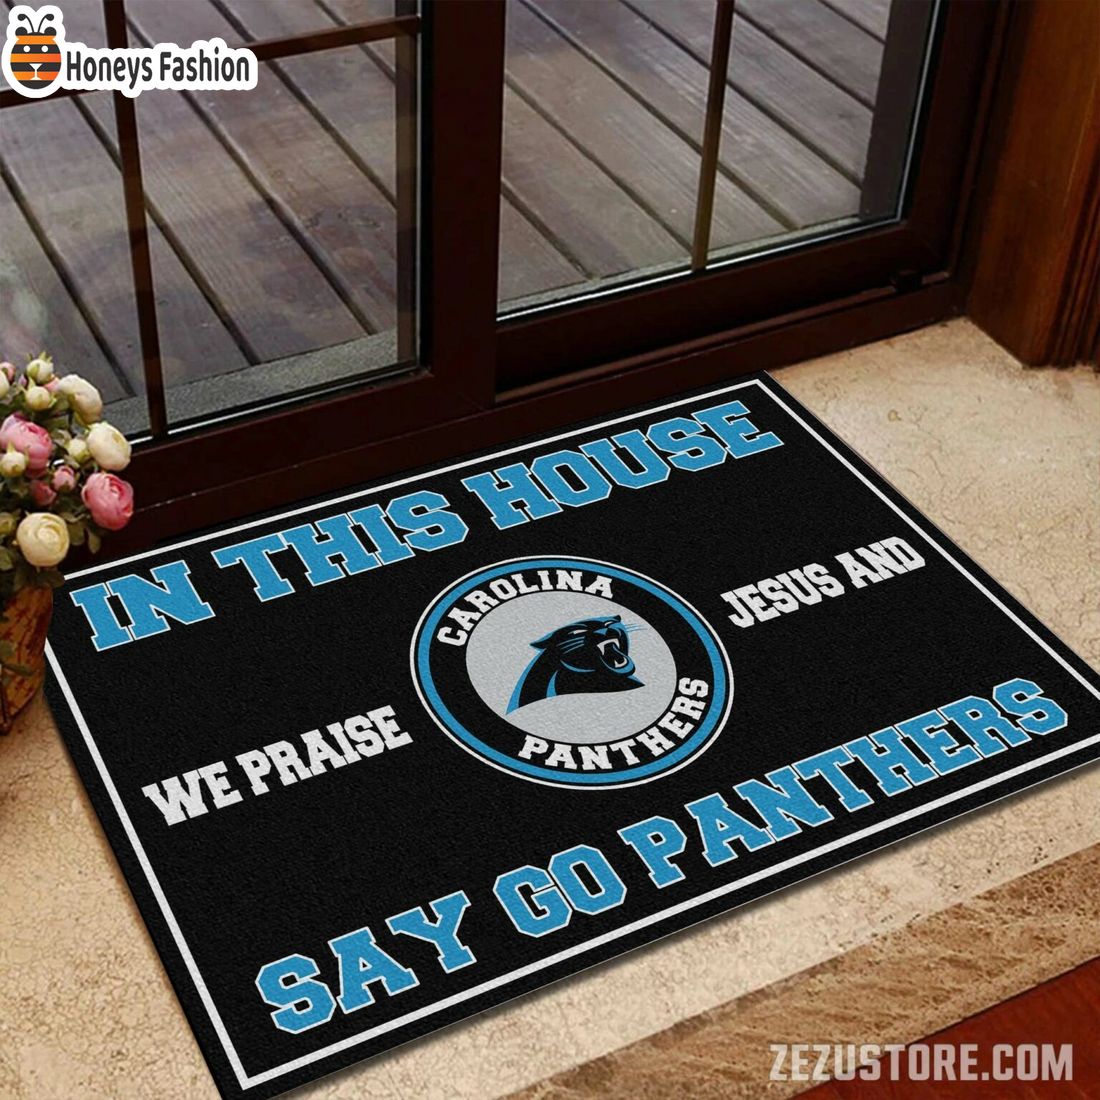 In this house we praise jesus and say go Panthers doormat